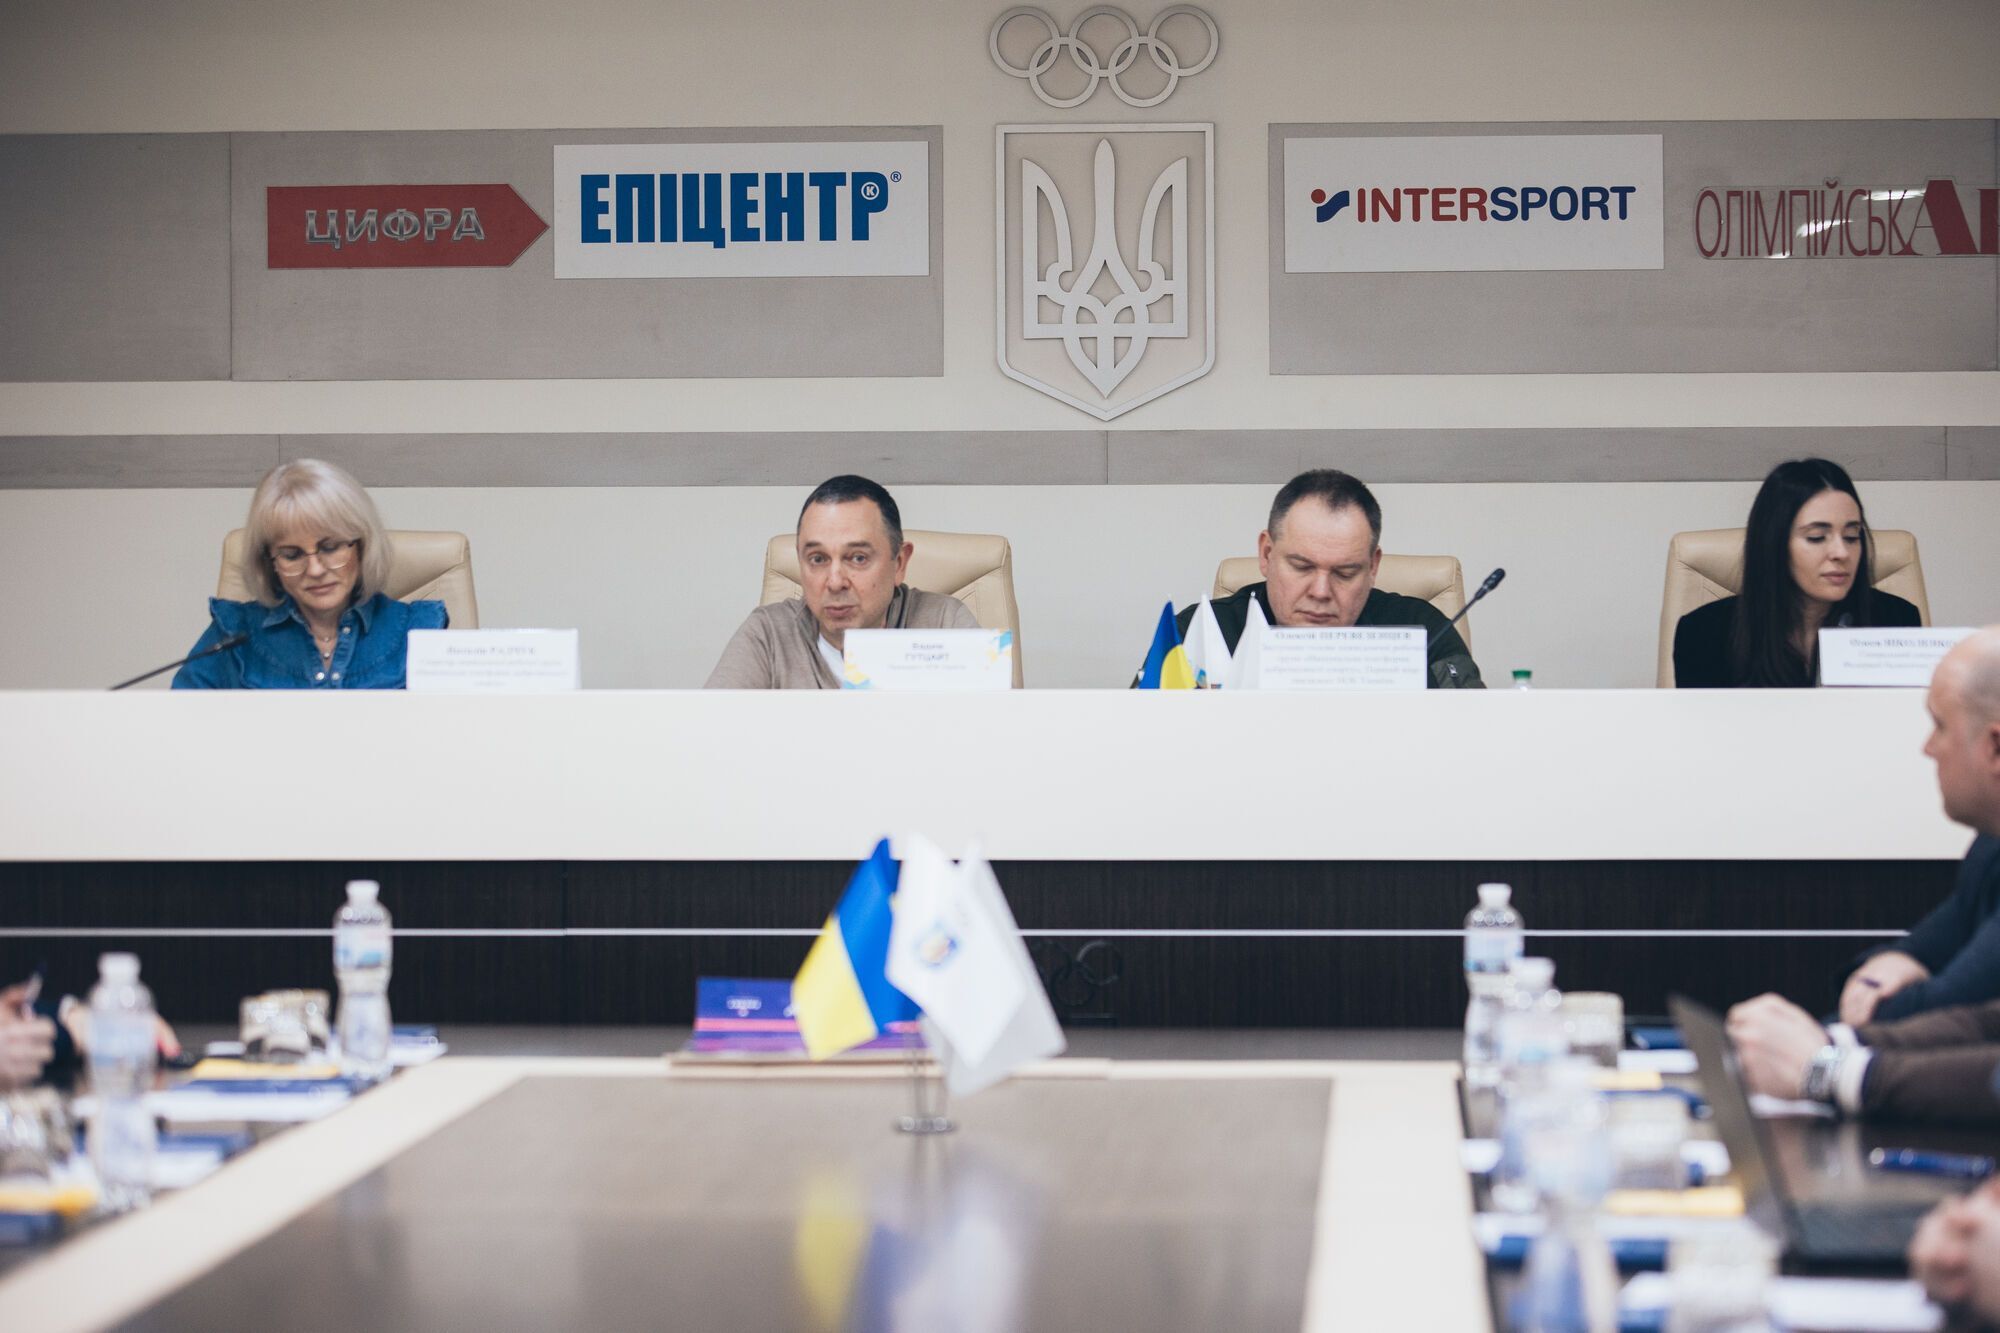 A meeting of the National Platform for Sports Integrity and the Badminton Federation of Ukraine took place